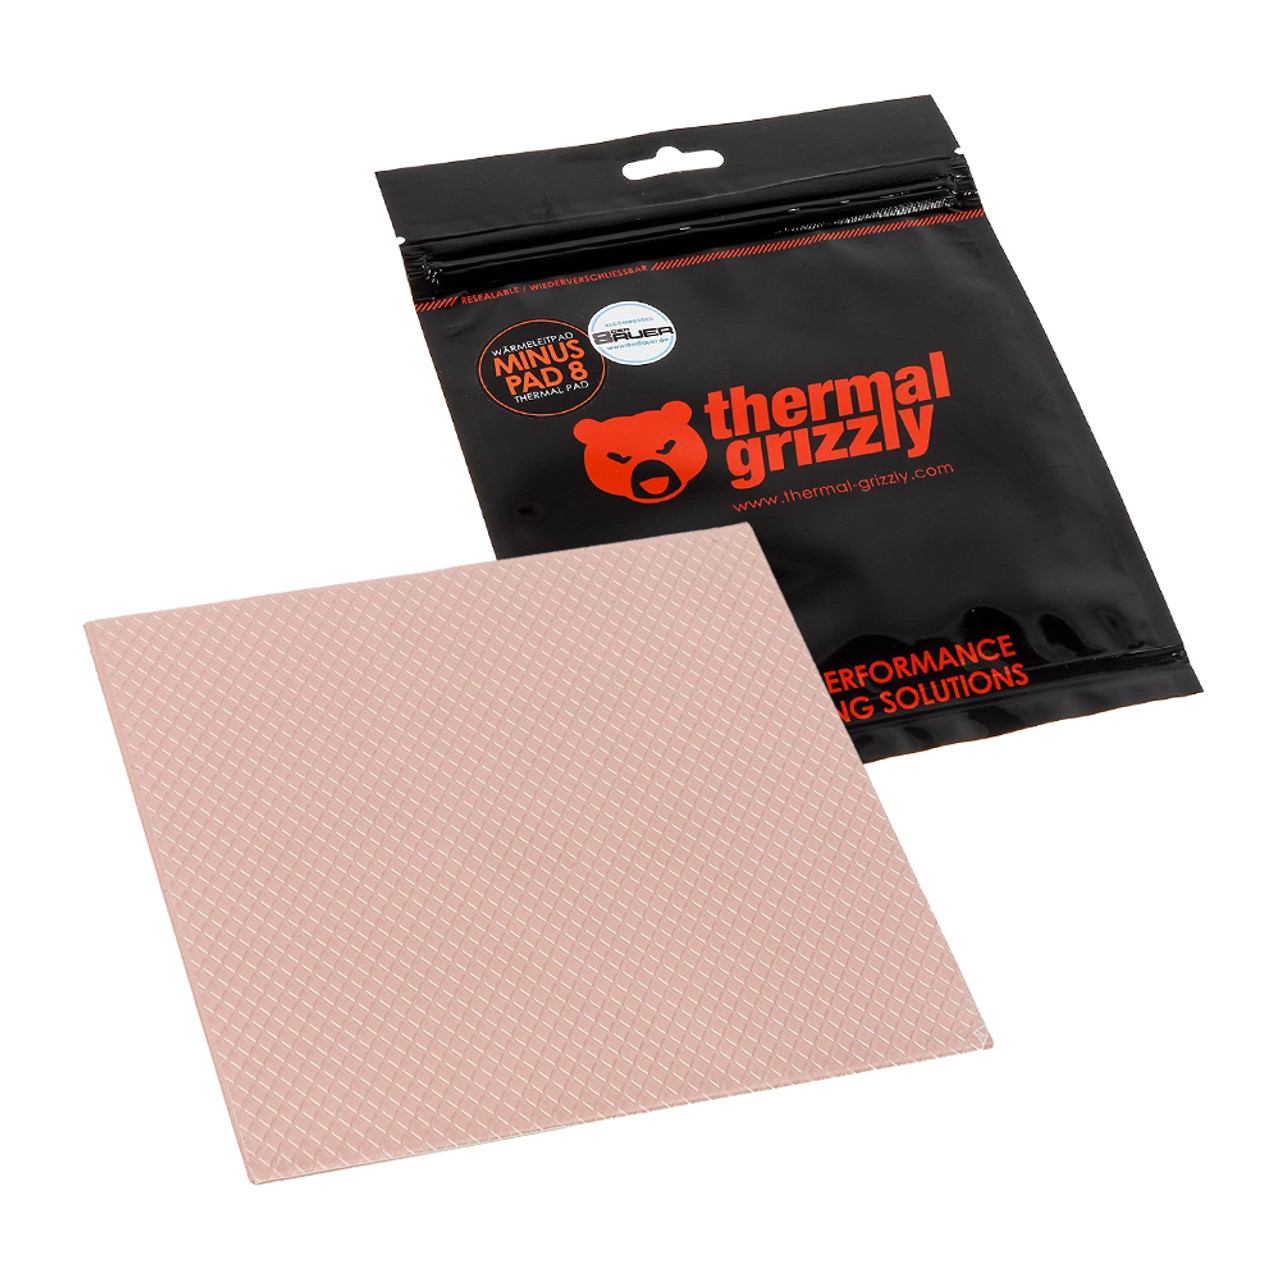 Thermal Grizzly Minus Pad 8 - 100x 100x 1.5 mm (TG-MP8-100-100-15-1R)